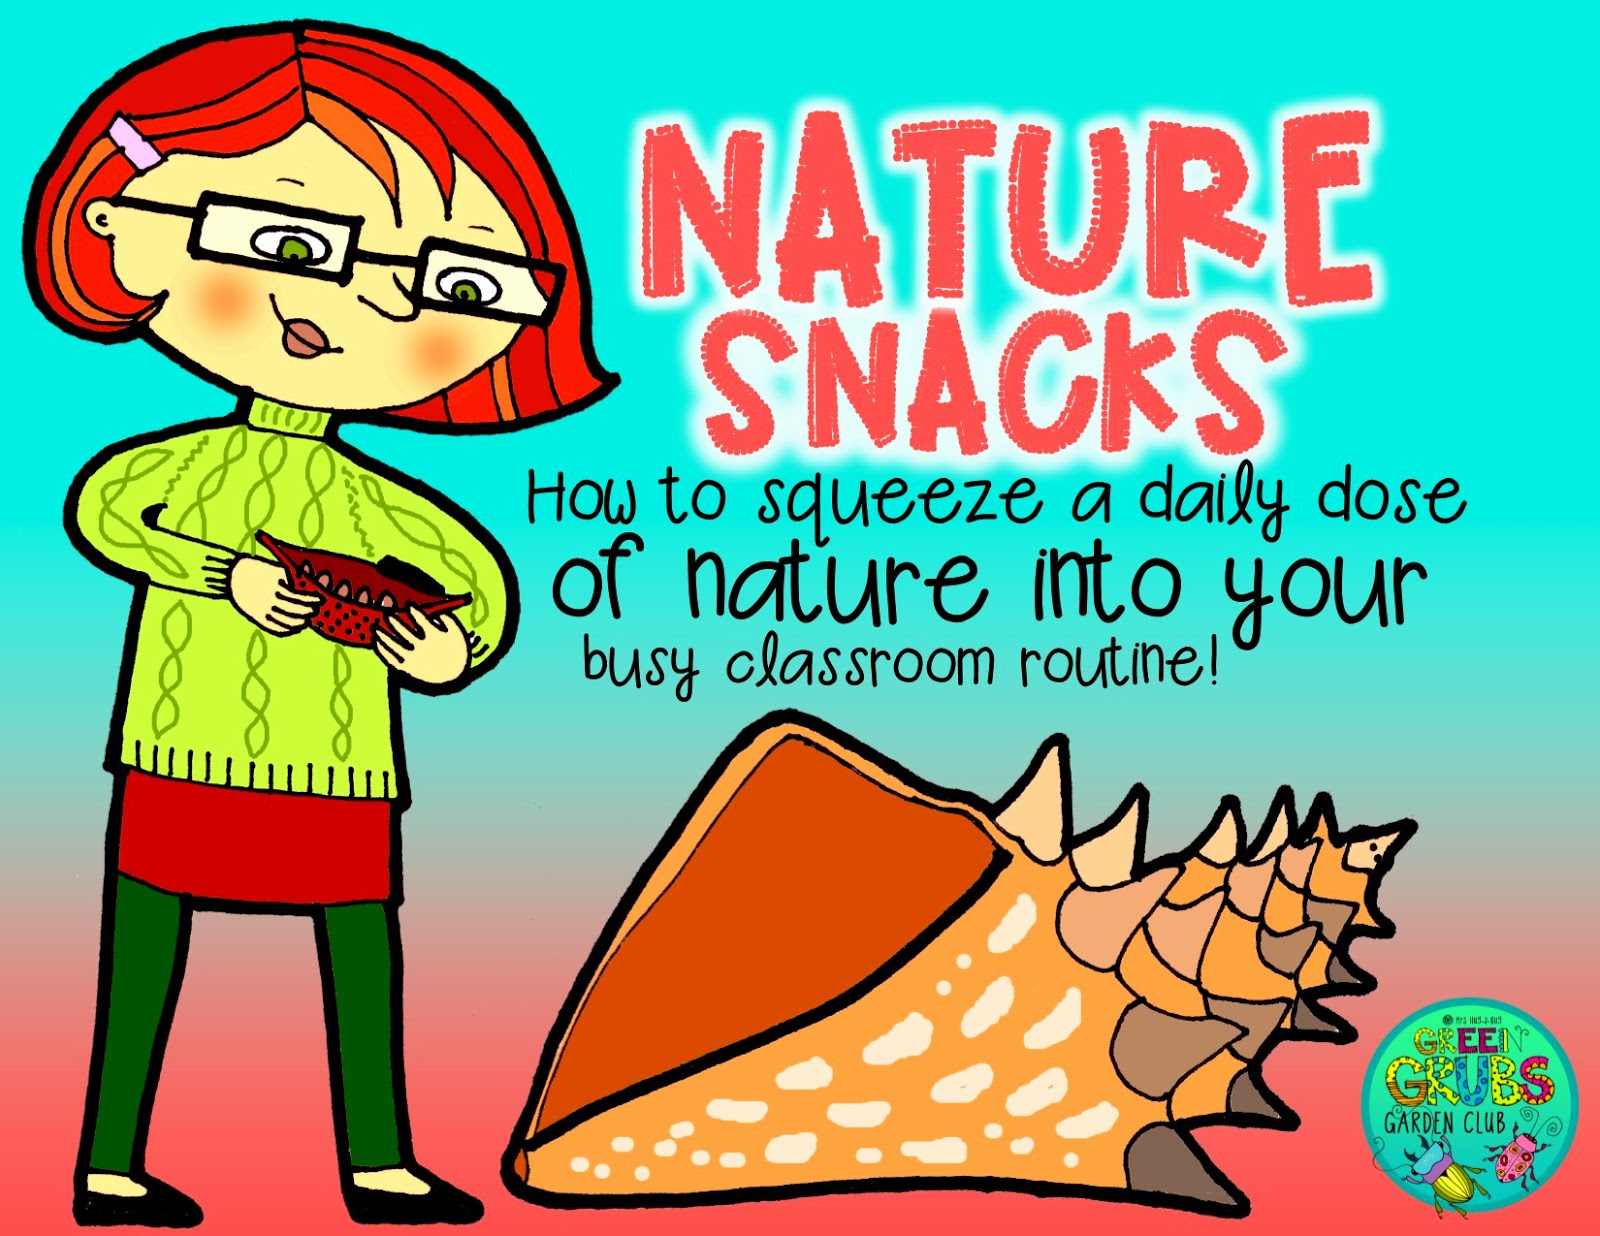 How to squeeze a daily dose of nature into your busy classroom routine {+36 free ‘Nature Snack’ prompt cards!}